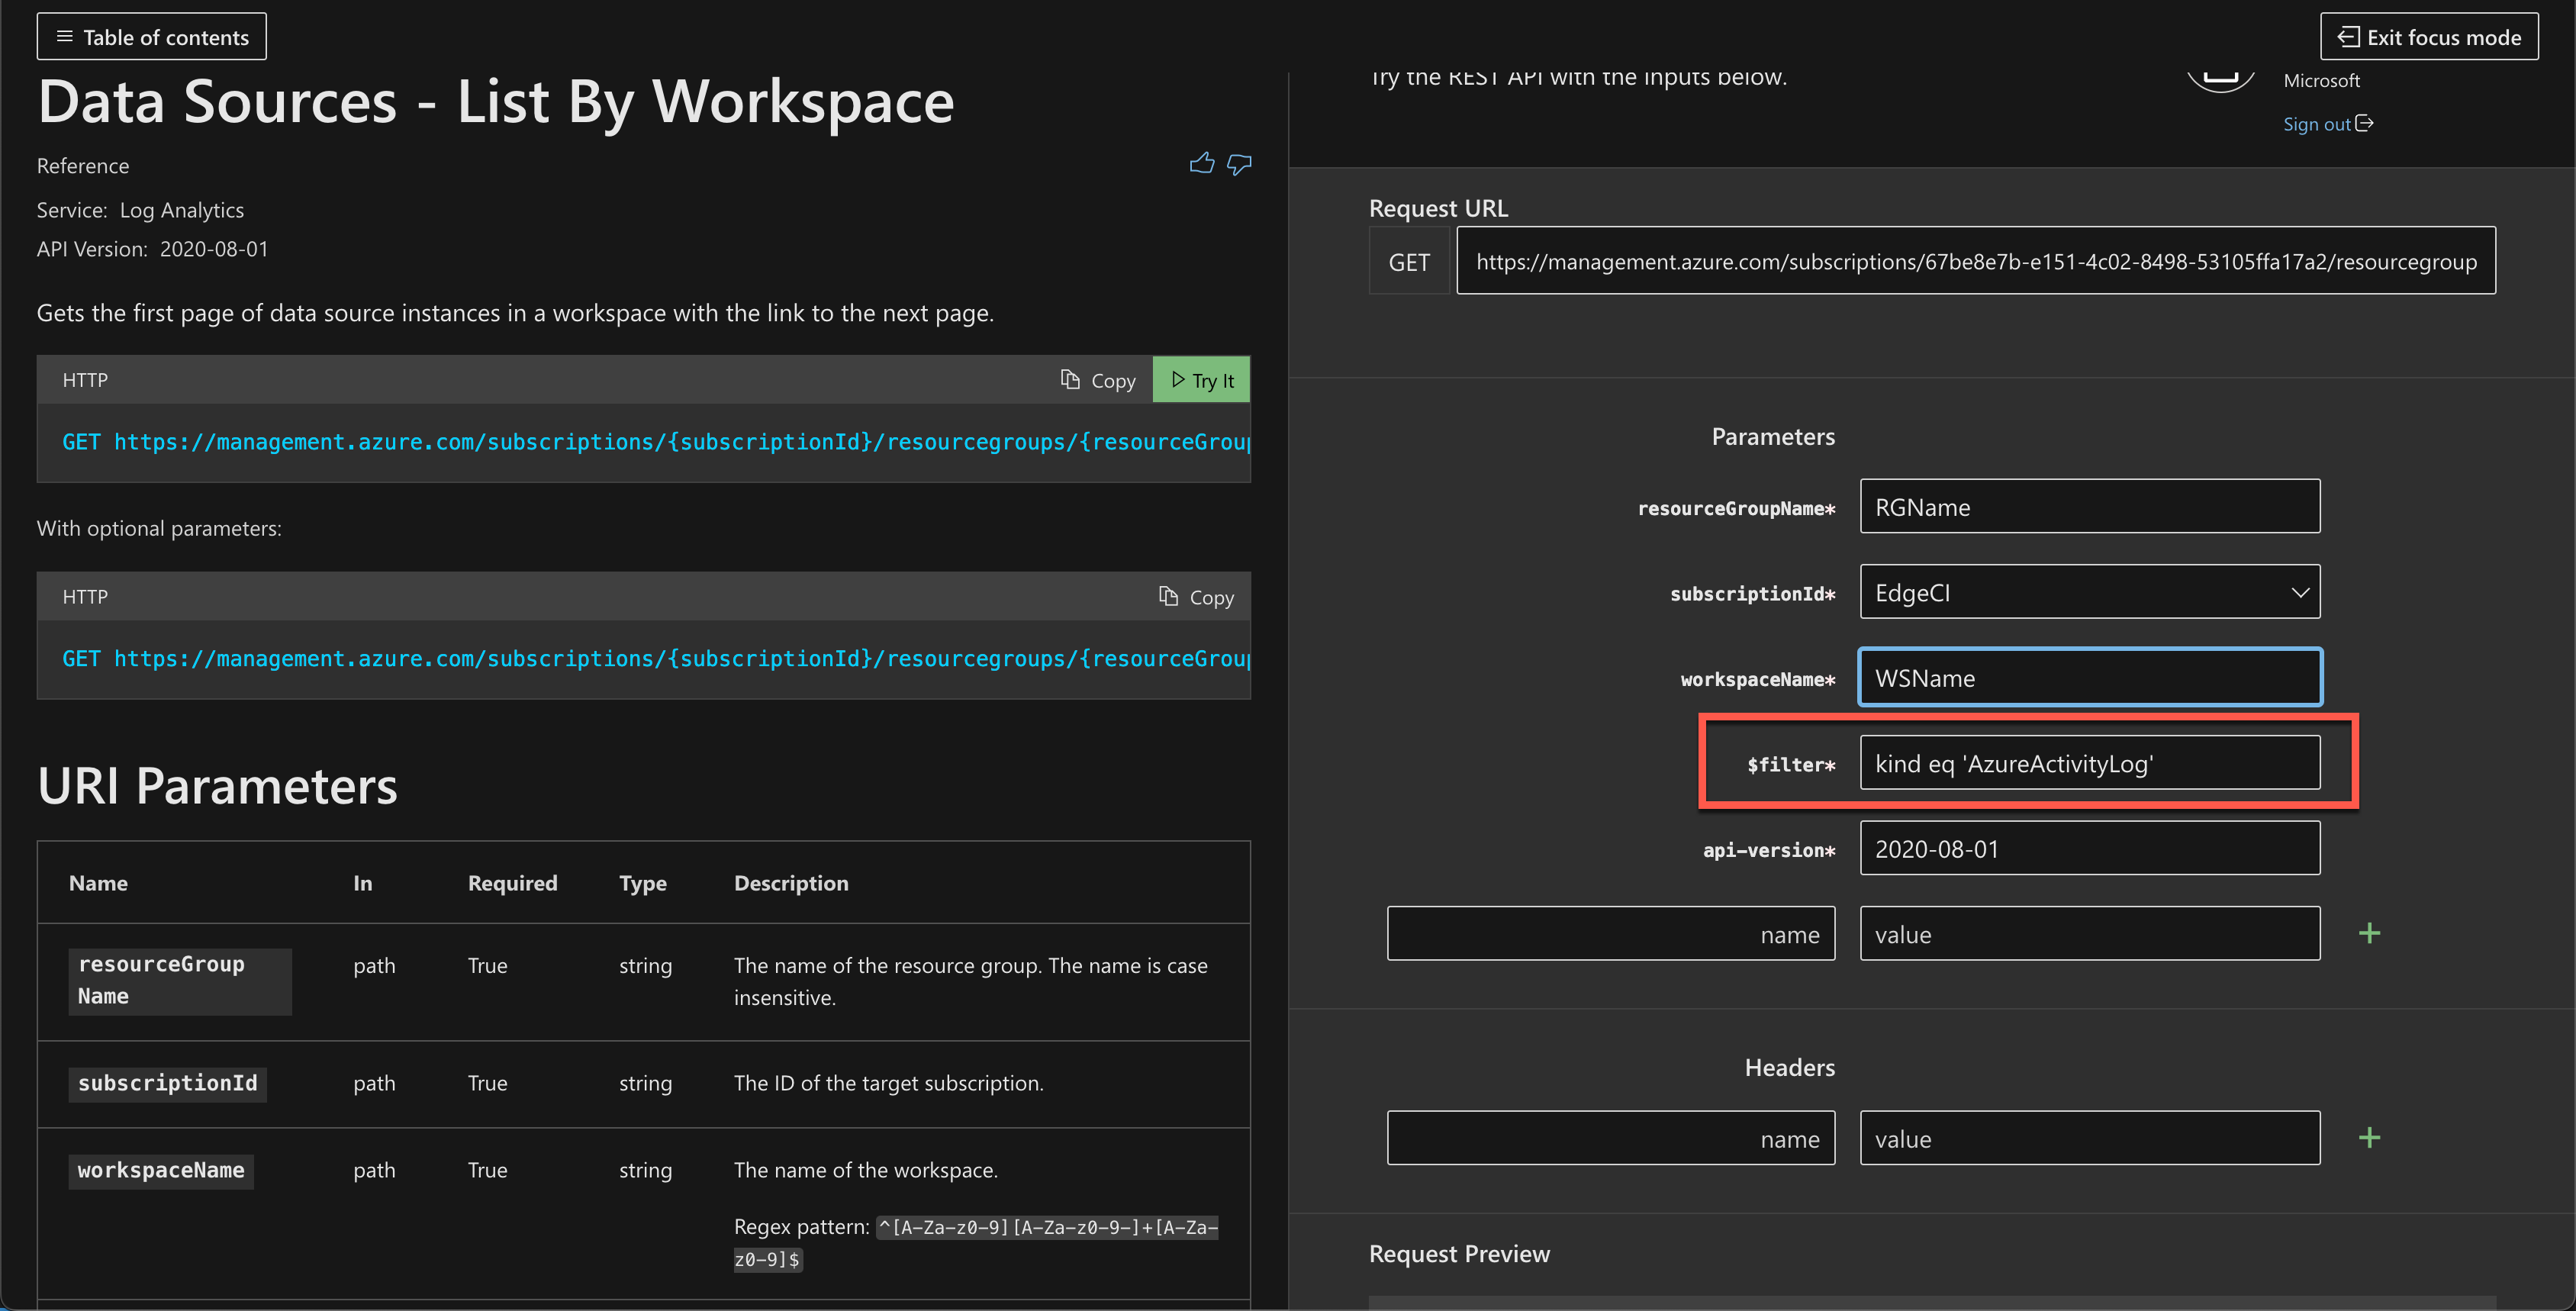 Screenshot showing the configuration of the Data Sources - List By Workspace API.